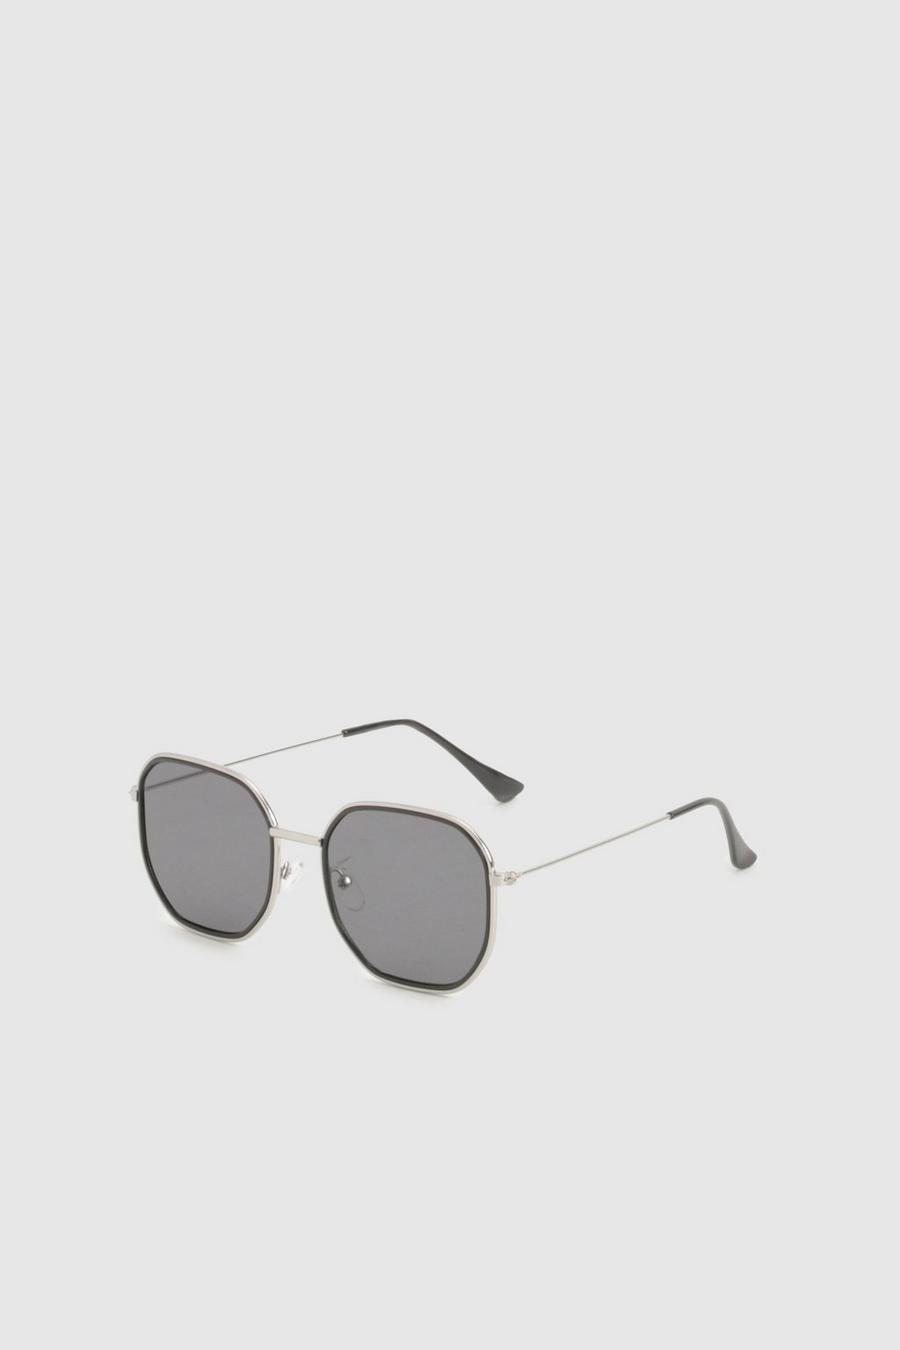 Silver Tinted Metal Frame Round Sunglasses